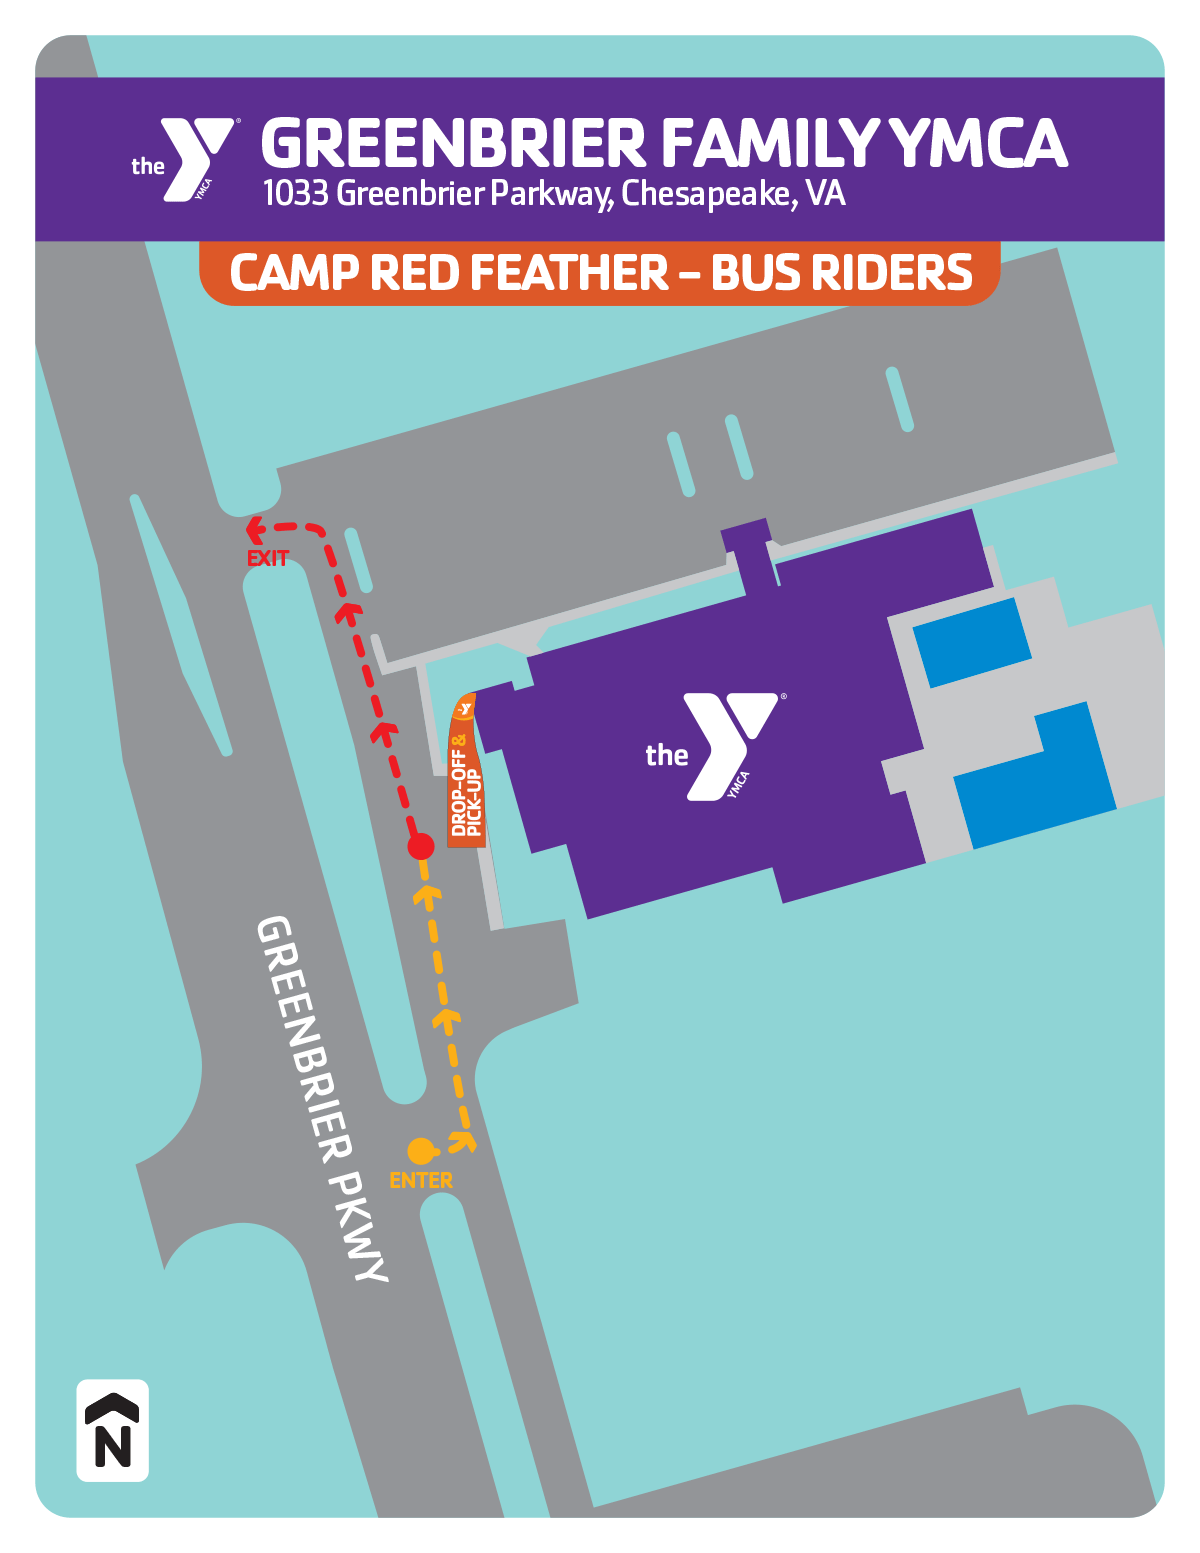 Summer camp drop-off & pick-up locations for YMCA Camp Red Feather